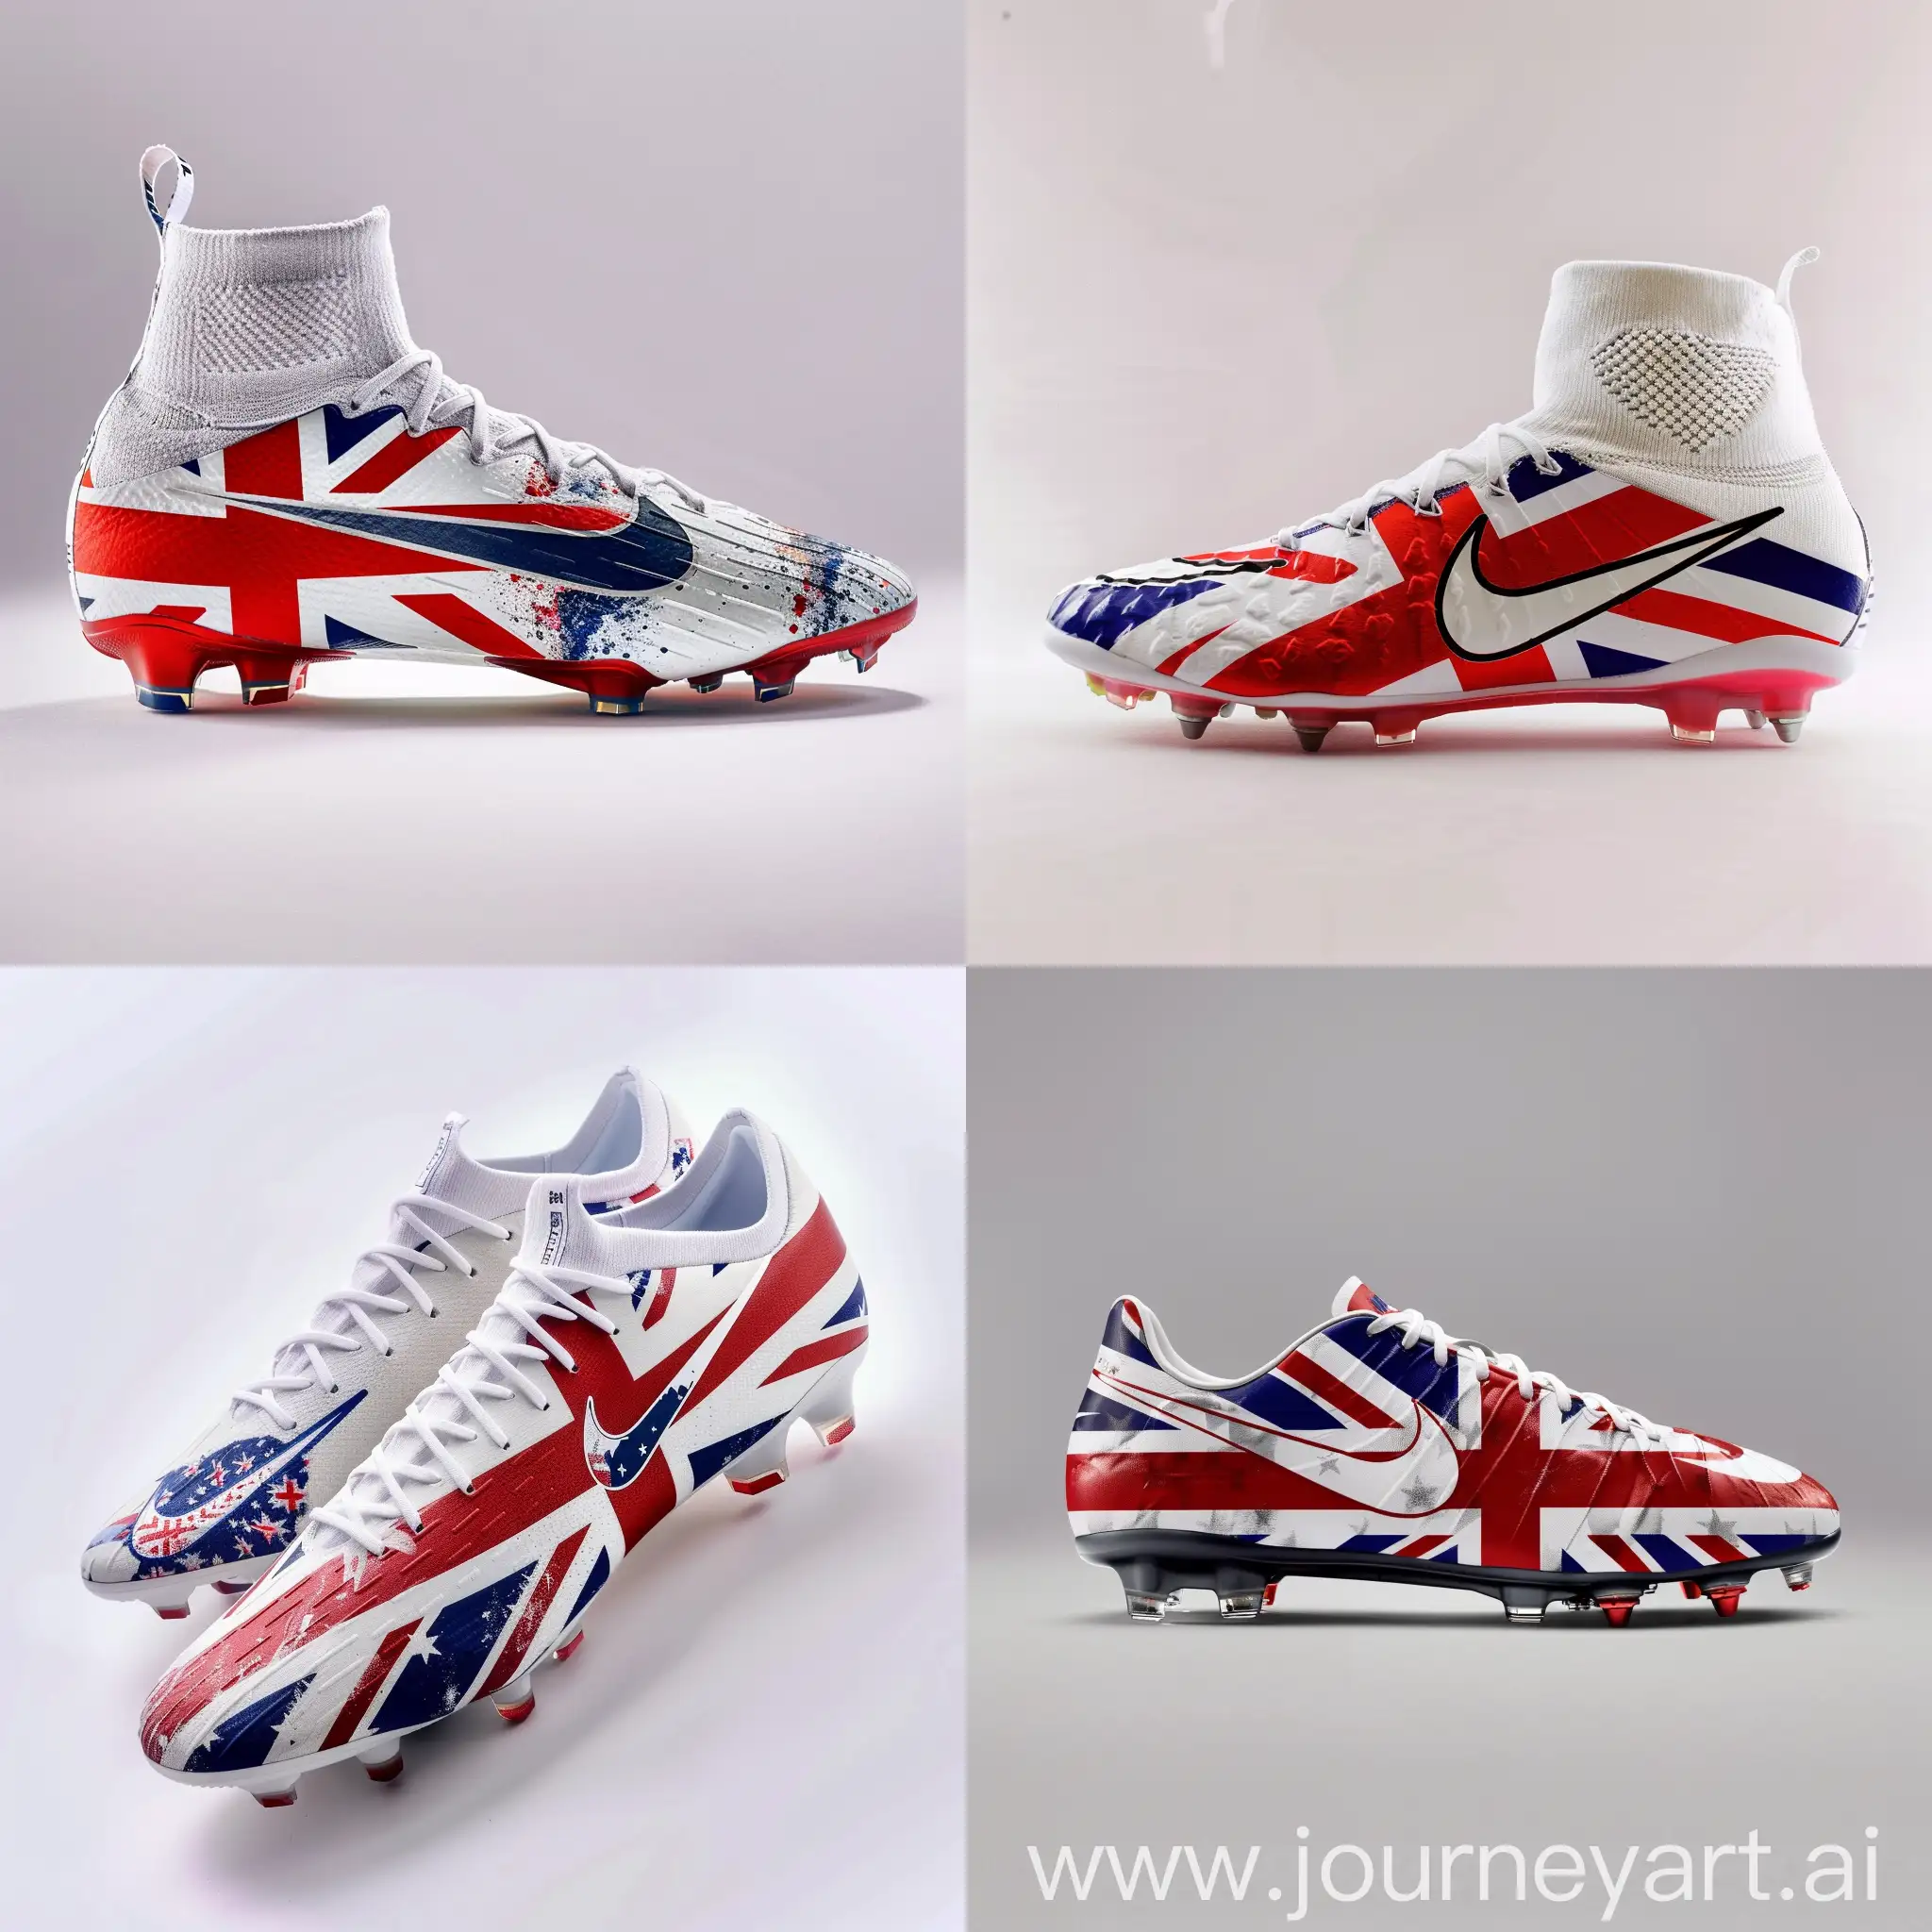 Nike Soccer Boots English Flag Design, Simple White Background, Product Photography, Catalog Pose, High Precision